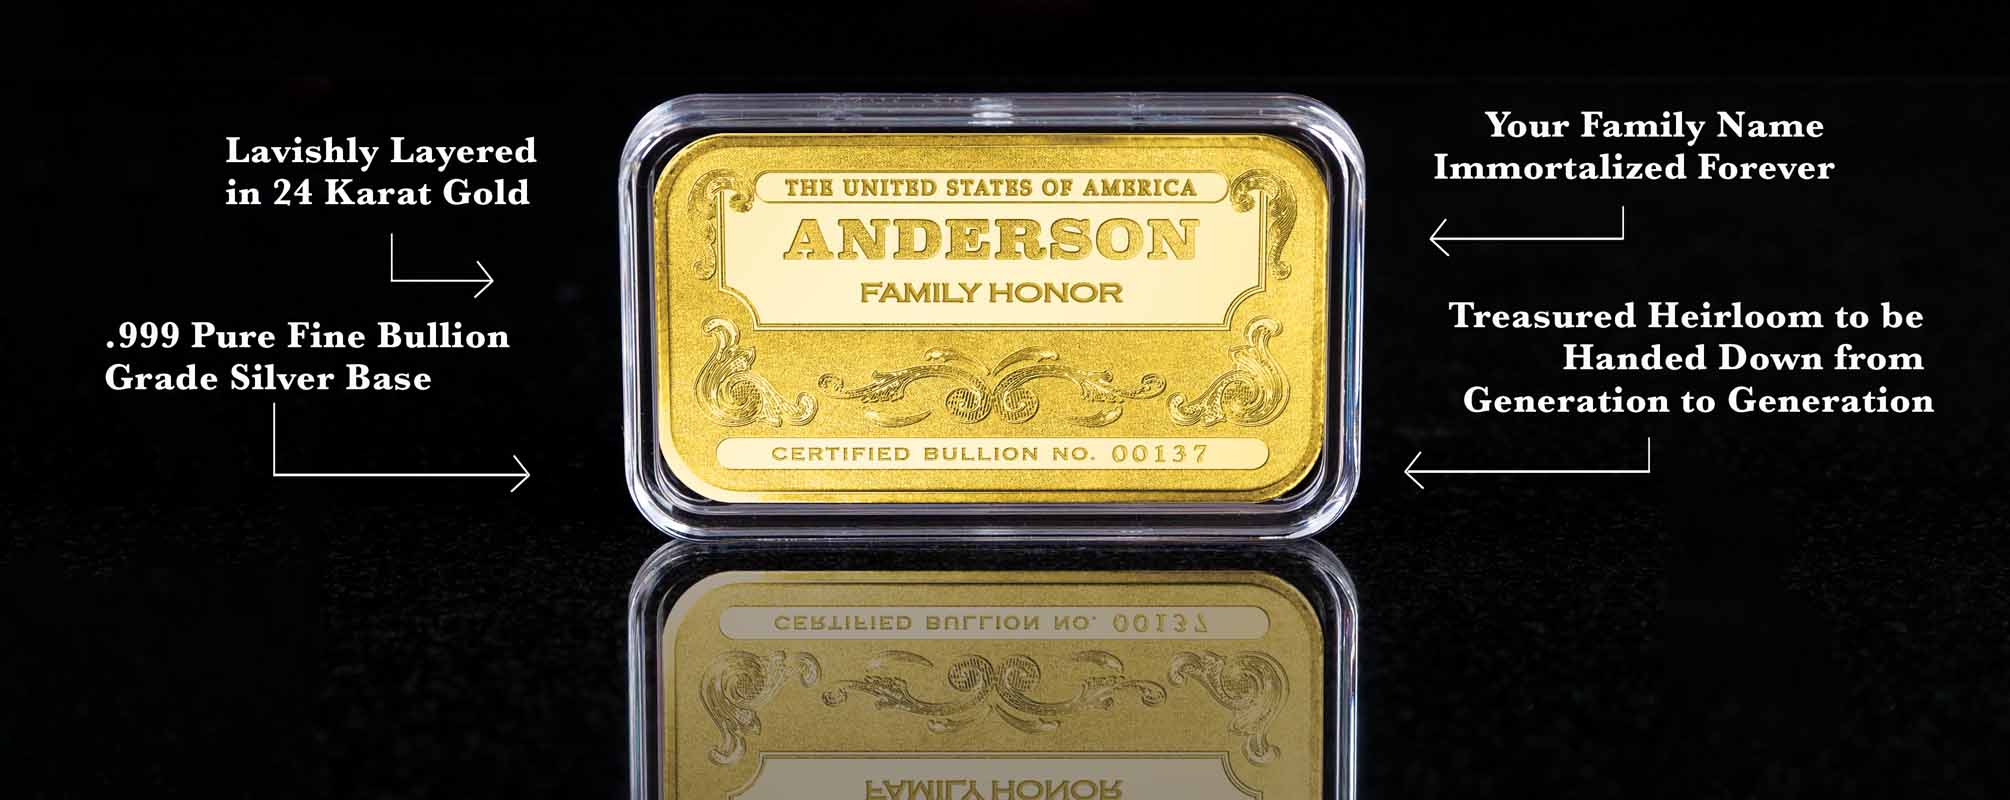 'Personalized Name' Family Honor Gold-Plated Silver Bars, Your Family Name Immortalized Forever, Layered in 24-Karat Gold, .999 Fine Silver Bullion Base, Treasured Heirloom to be Handed Down from Generation to Generation